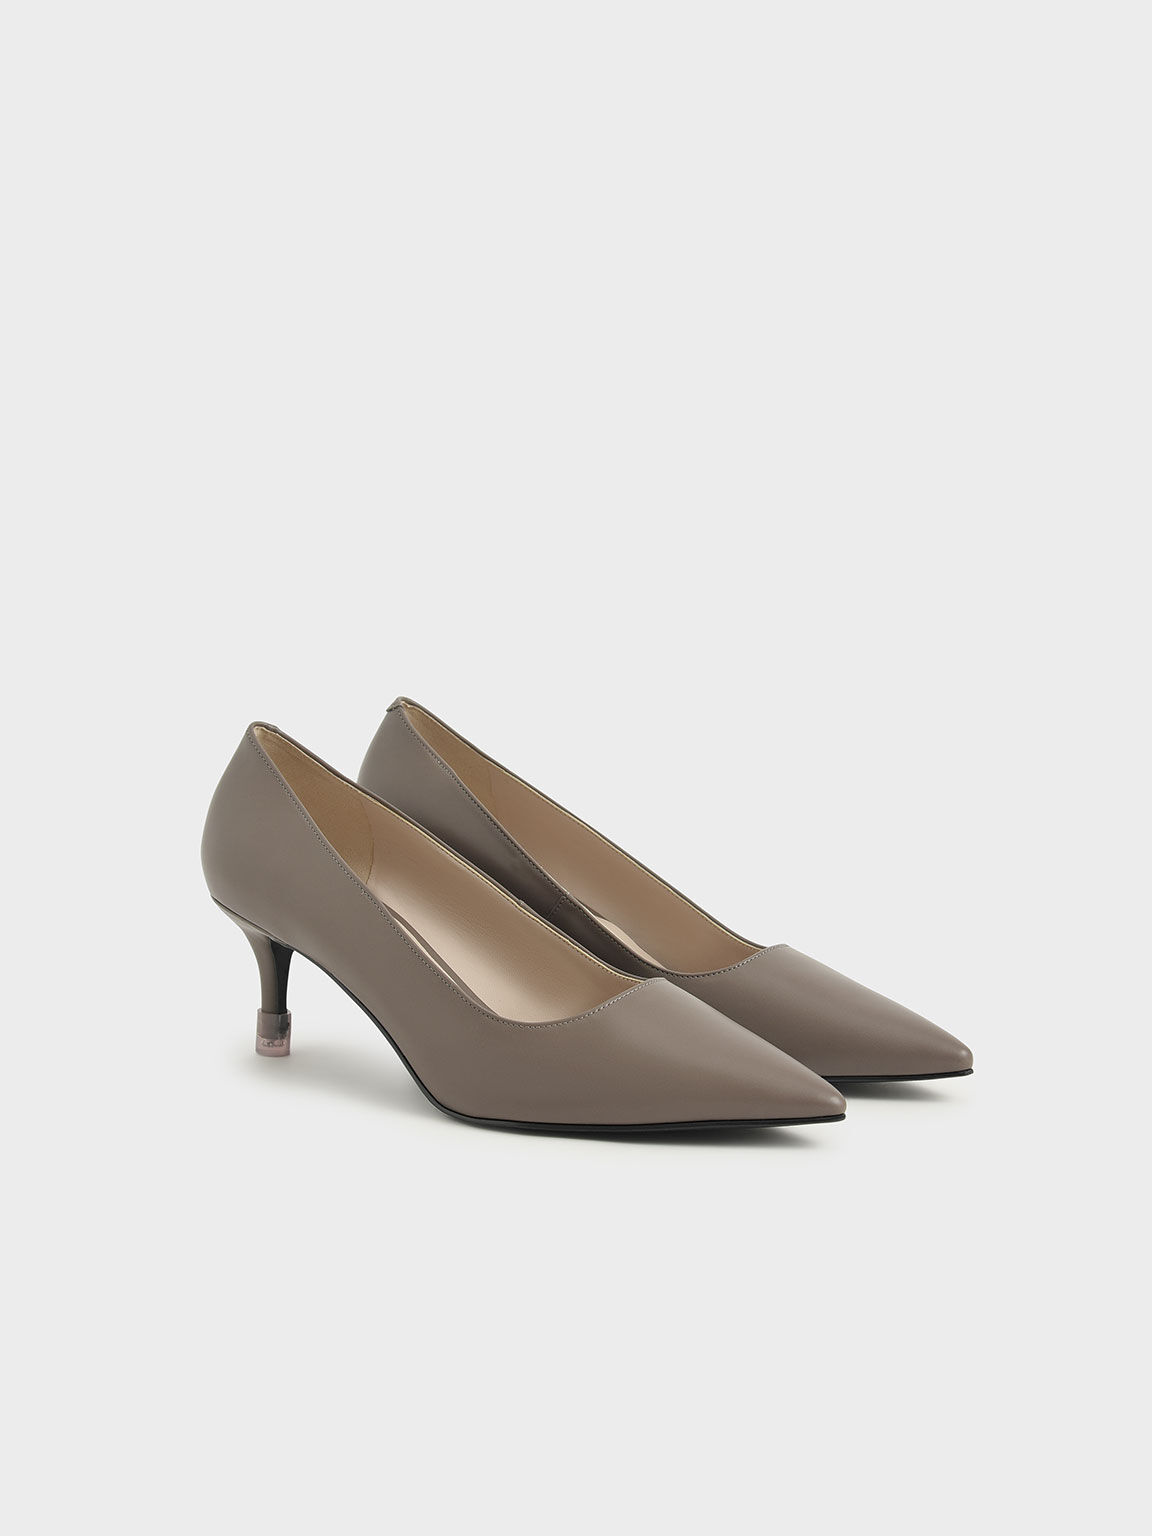 Mid Heel Pointed Toe Pumps, Taupe, hi-res